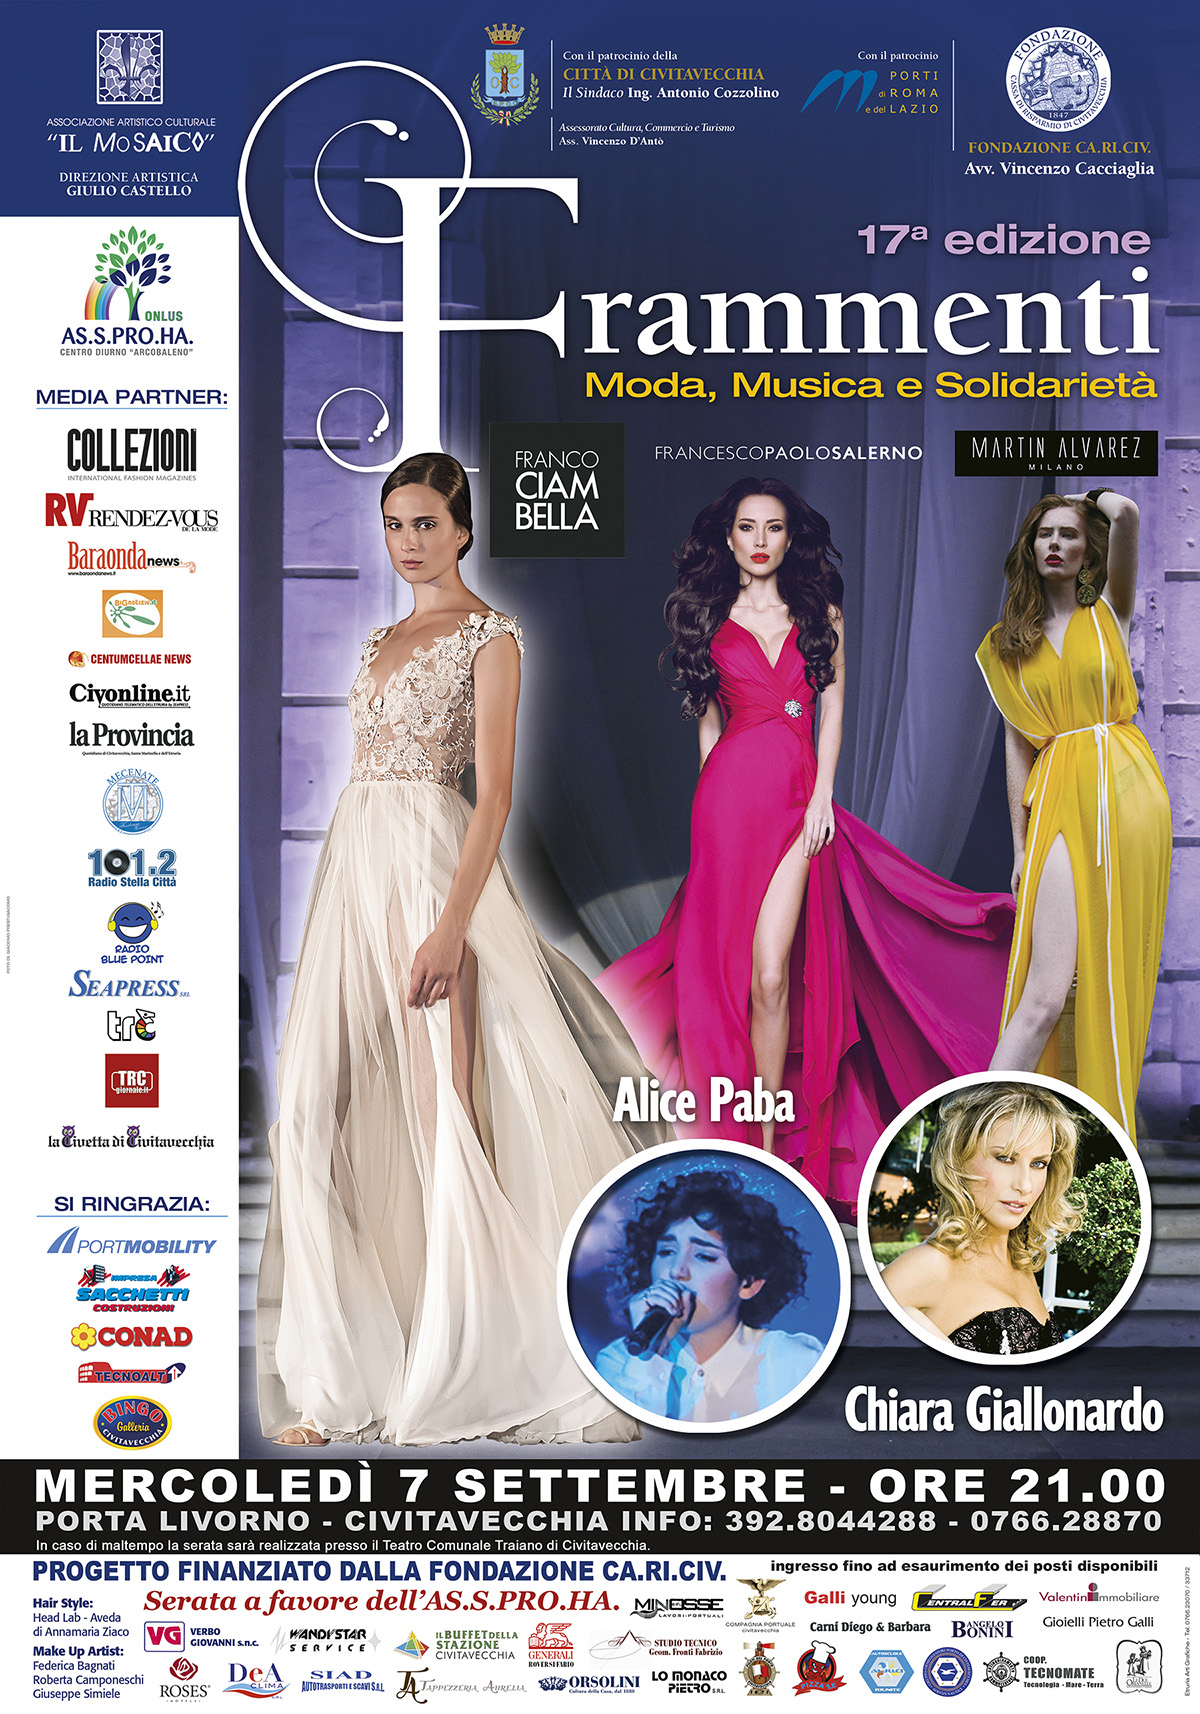 Official Frammenti 2016 Poster